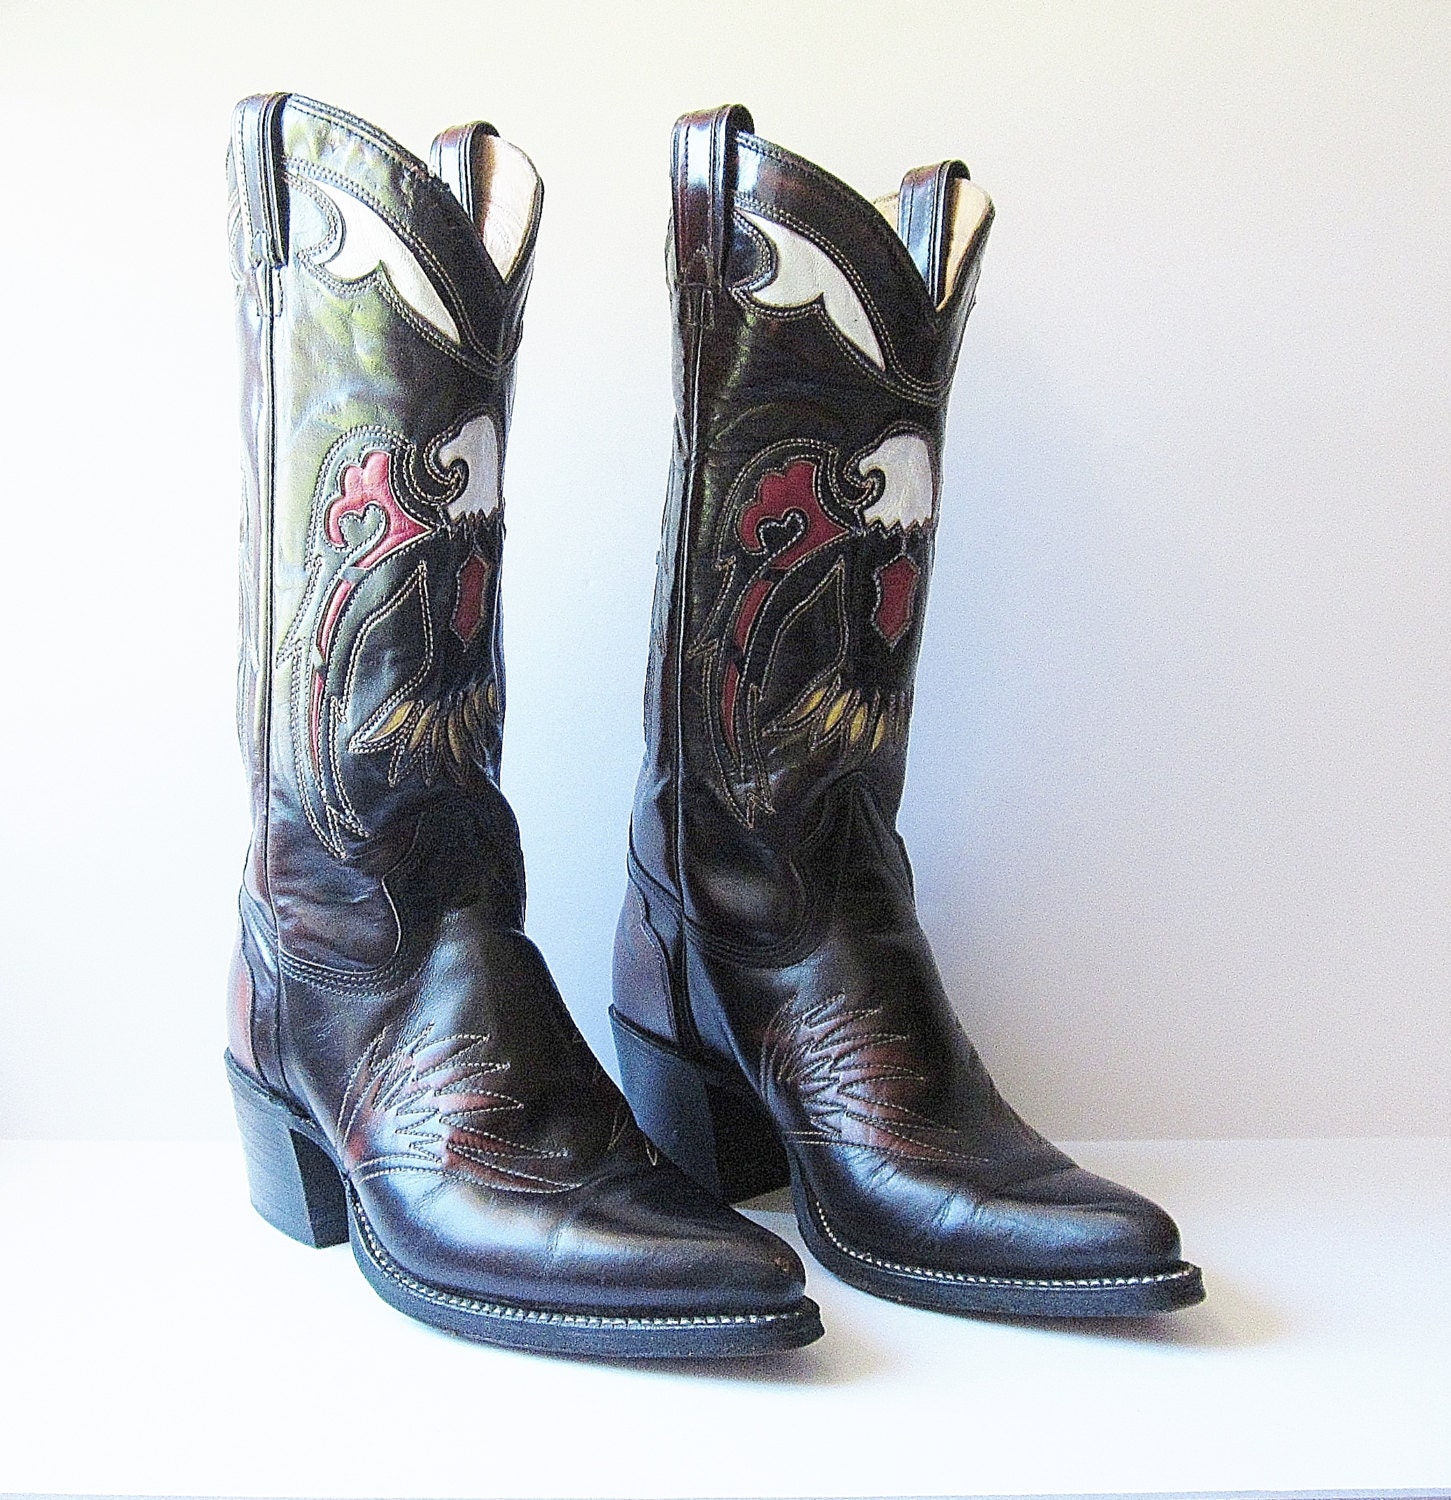 Texas Brand Boot Company Fancy Leather Mens Boots by jarmfarm